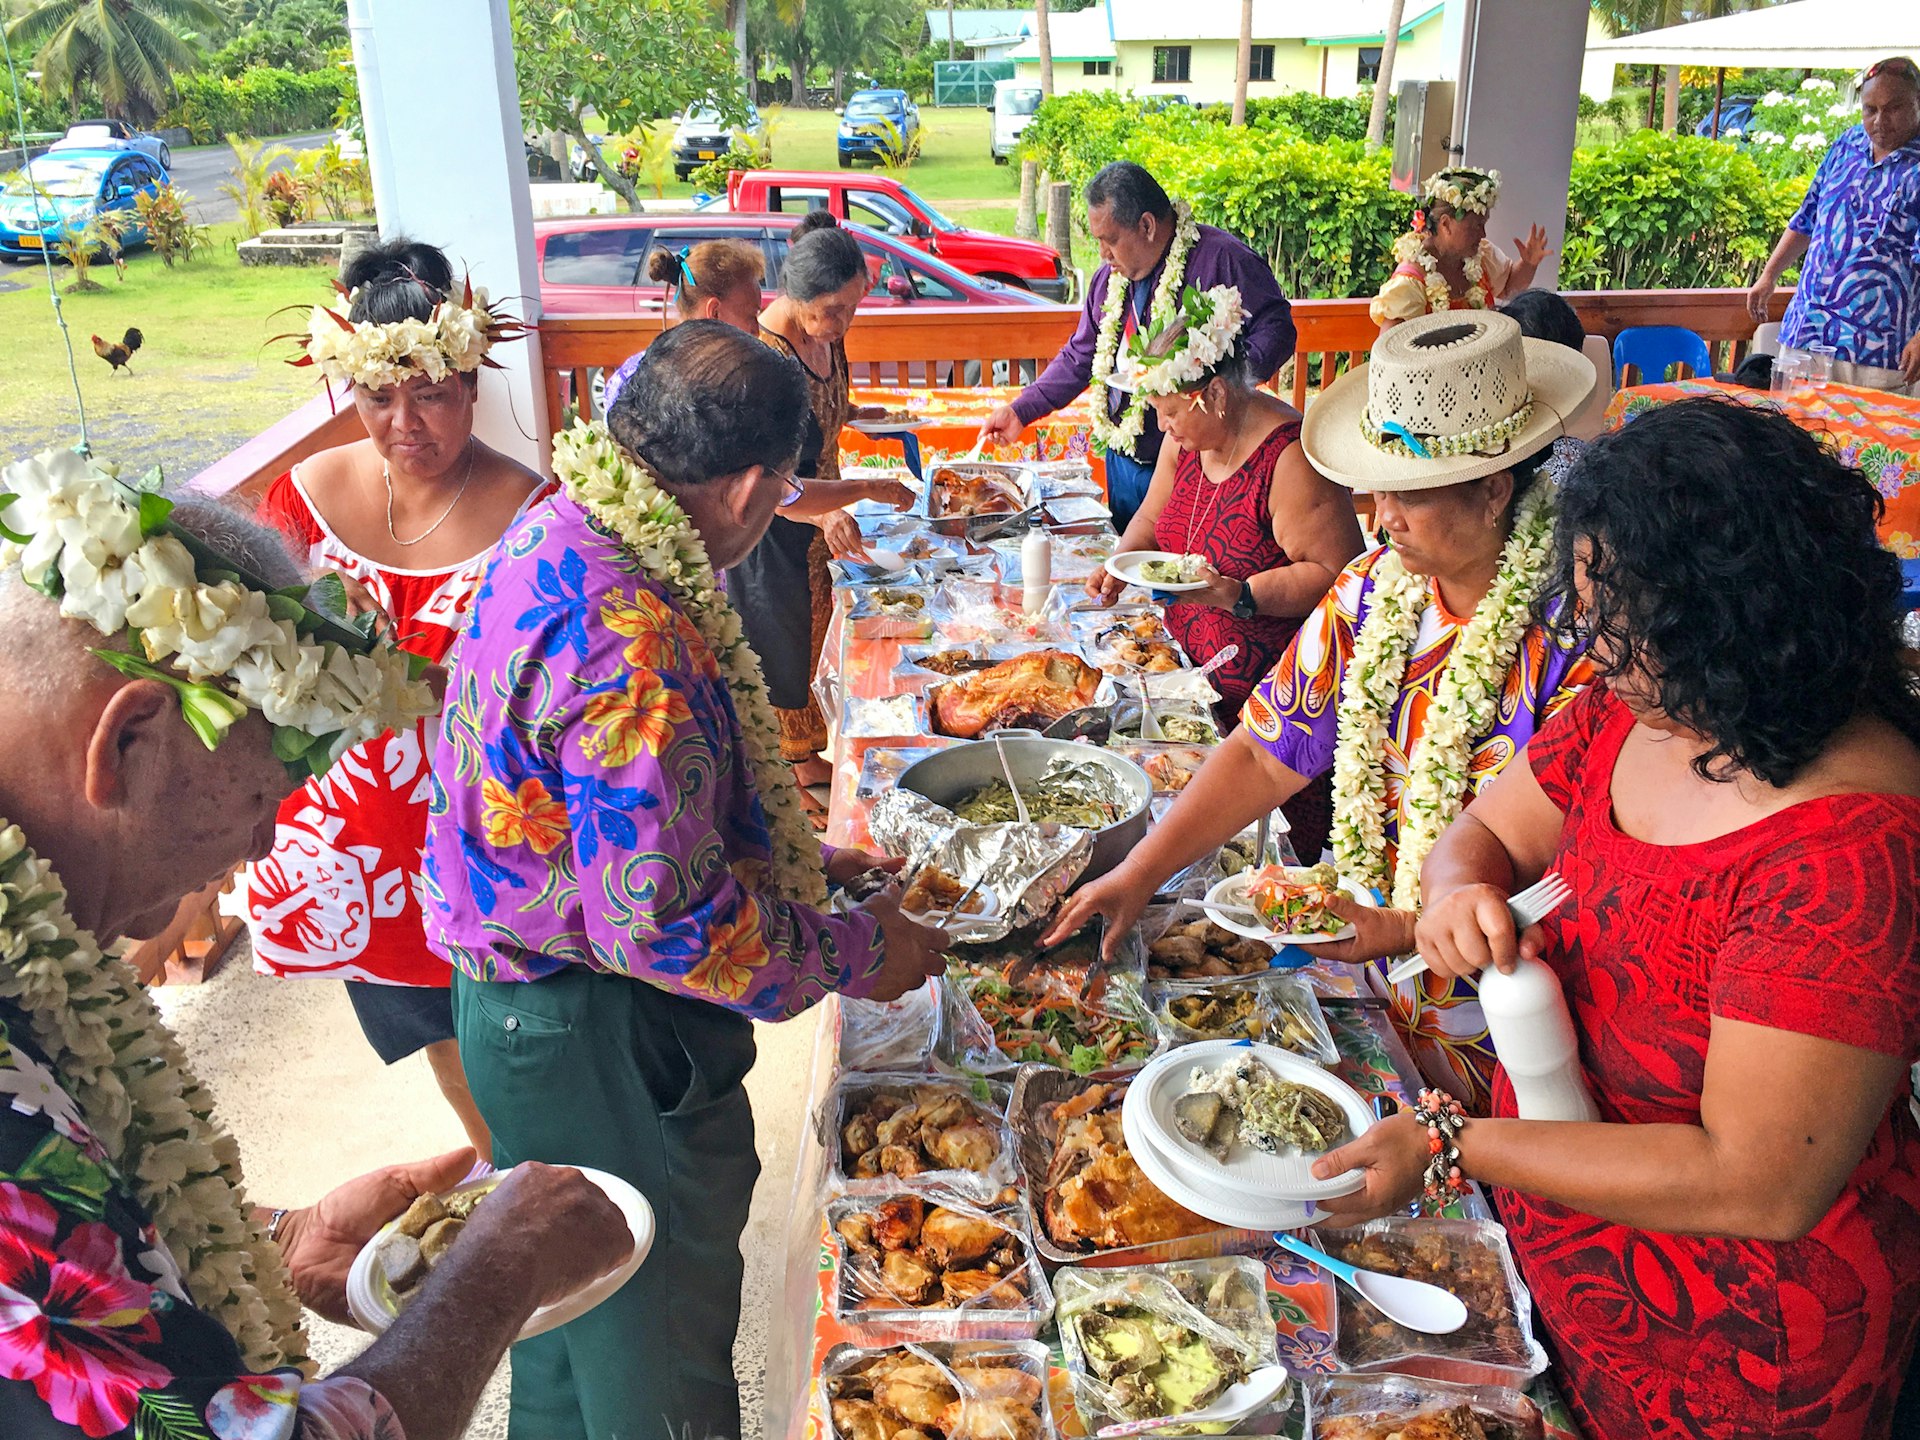 Cook Islanders line up at each side of a long table laden with different dishes during a traditional island celebration